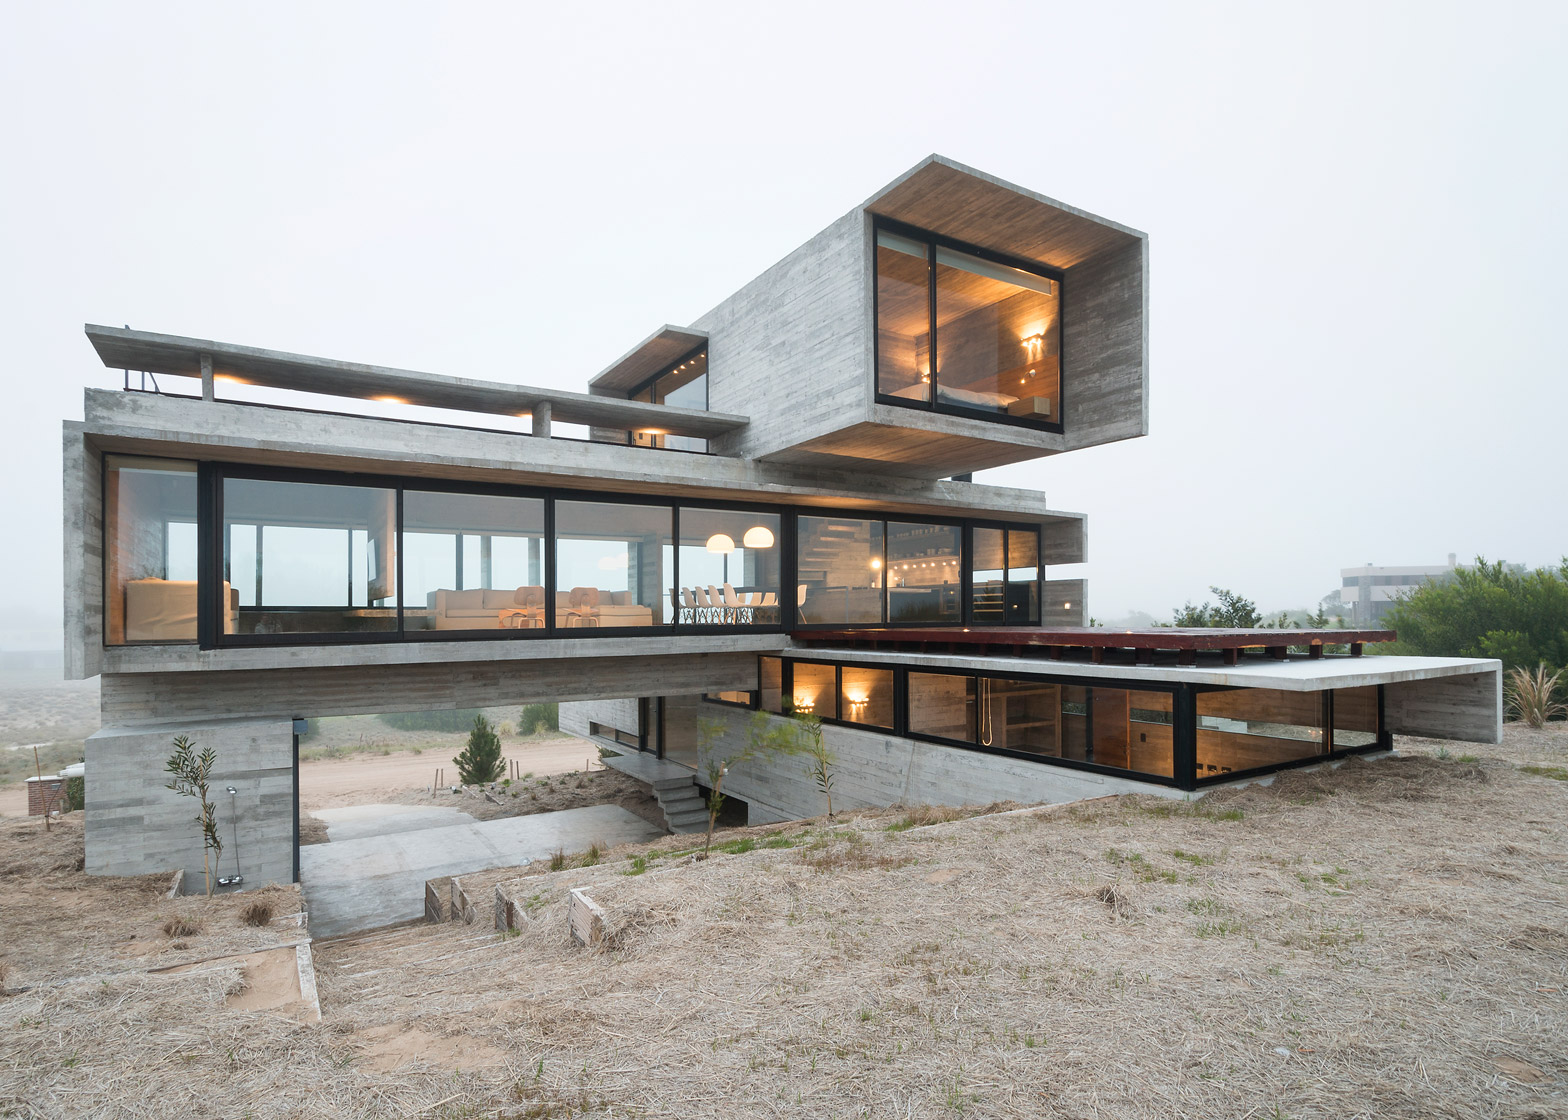 Concrete by Luciano Kruk stands on seaside course